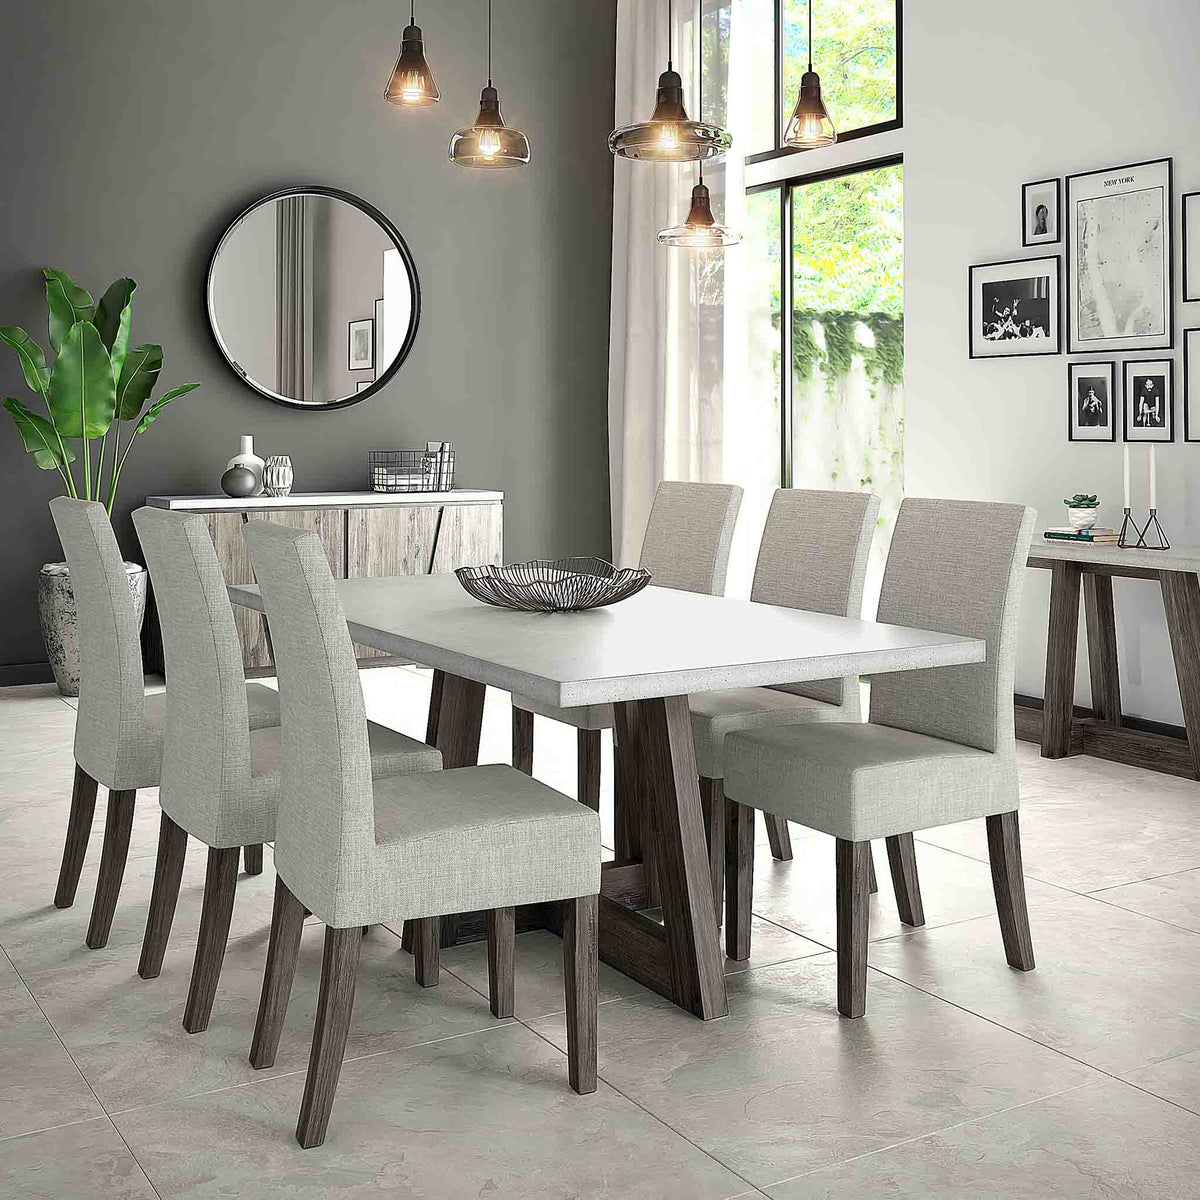 Lifestyle image of the Saltaire Grey Upholstered Fabric Dining Chair with large dining table